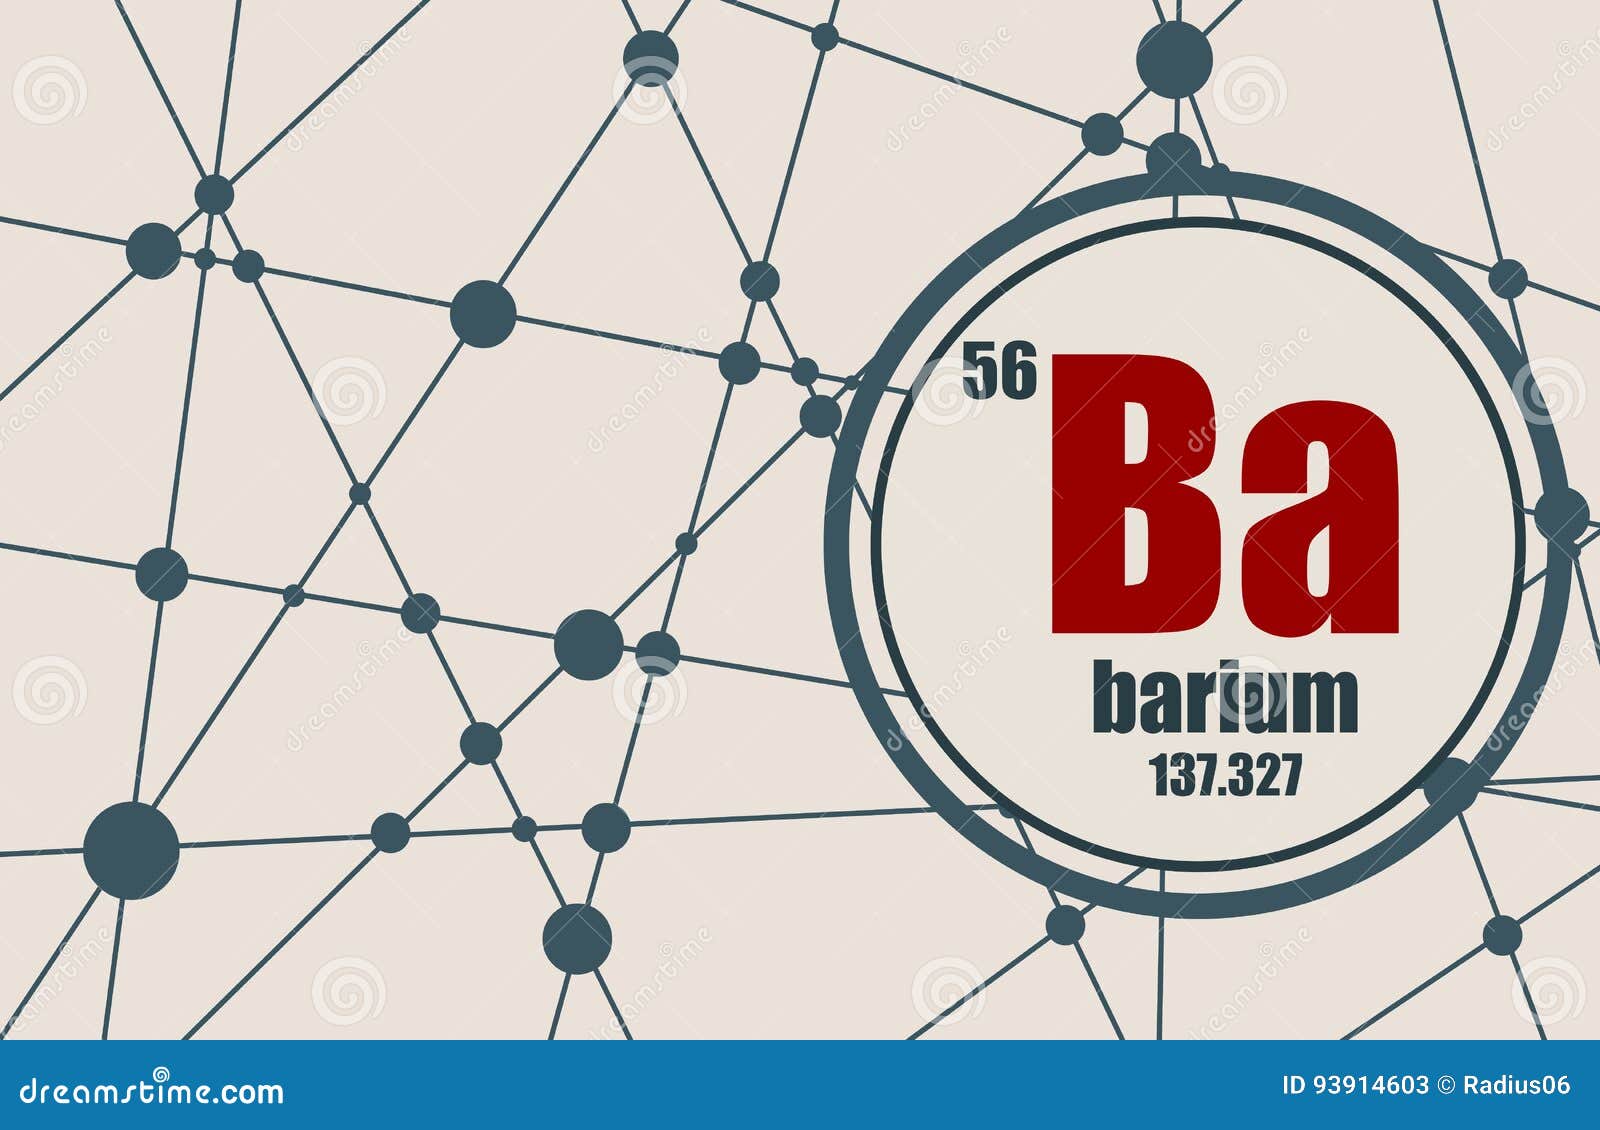 The Atomic Weight Of The Unknown Barium